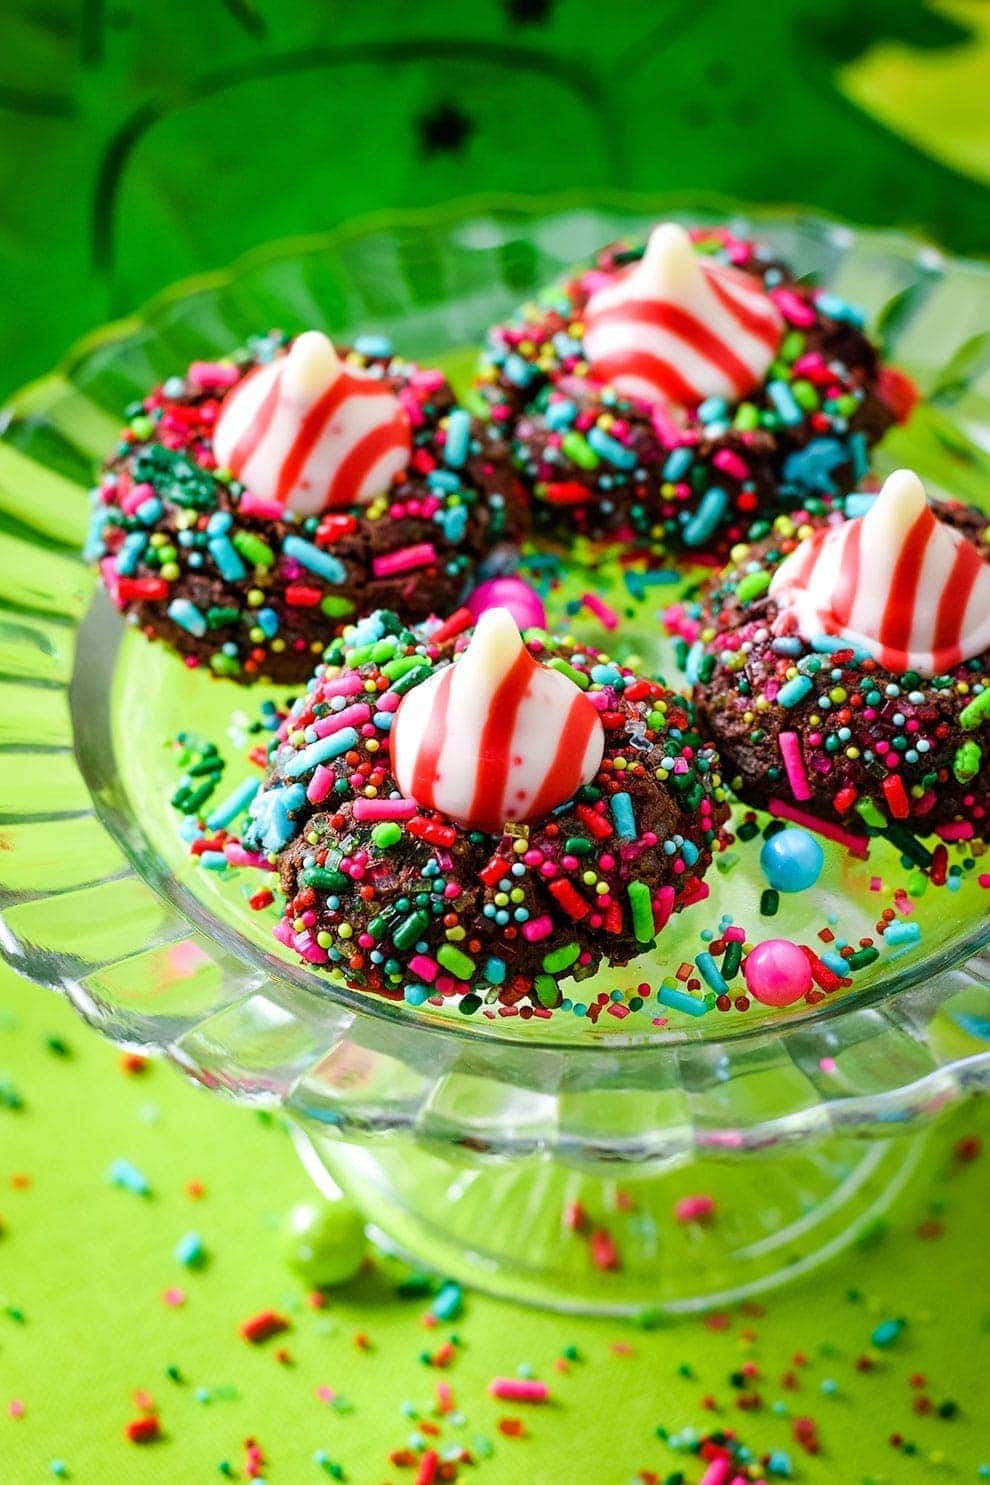 https://www.soulfullymade.com/wp-content/uploads/2018/12/Chocolate-Candy-Cane-Kiss-Cookies.jpg